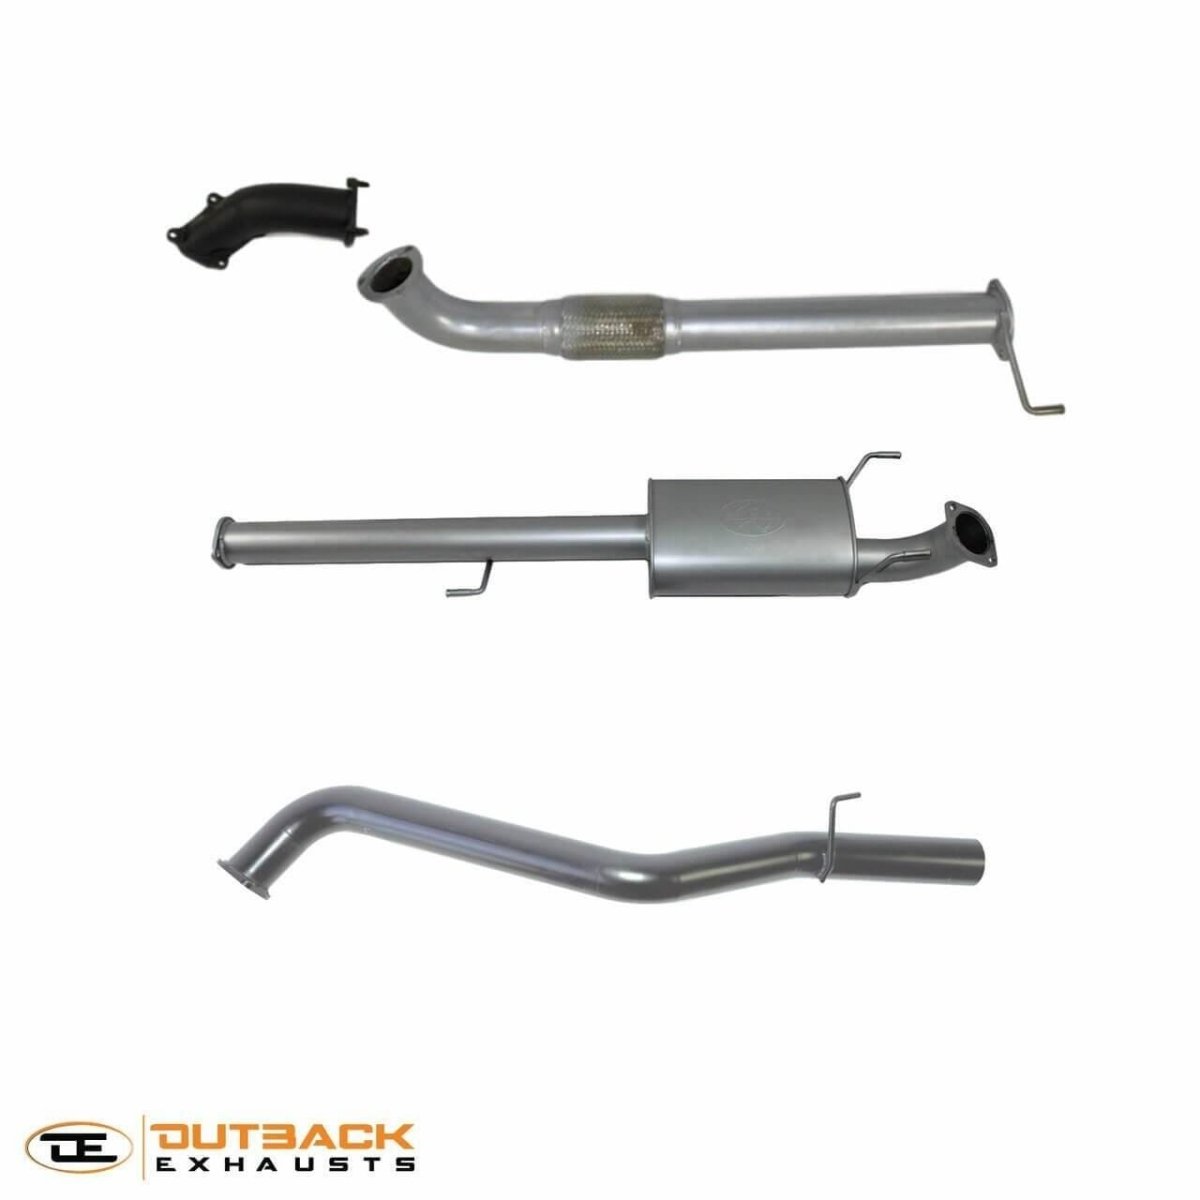 Outback 3" Exhaust to suit Toyota Surf 185 Series (KZN185) - NZ Offroader